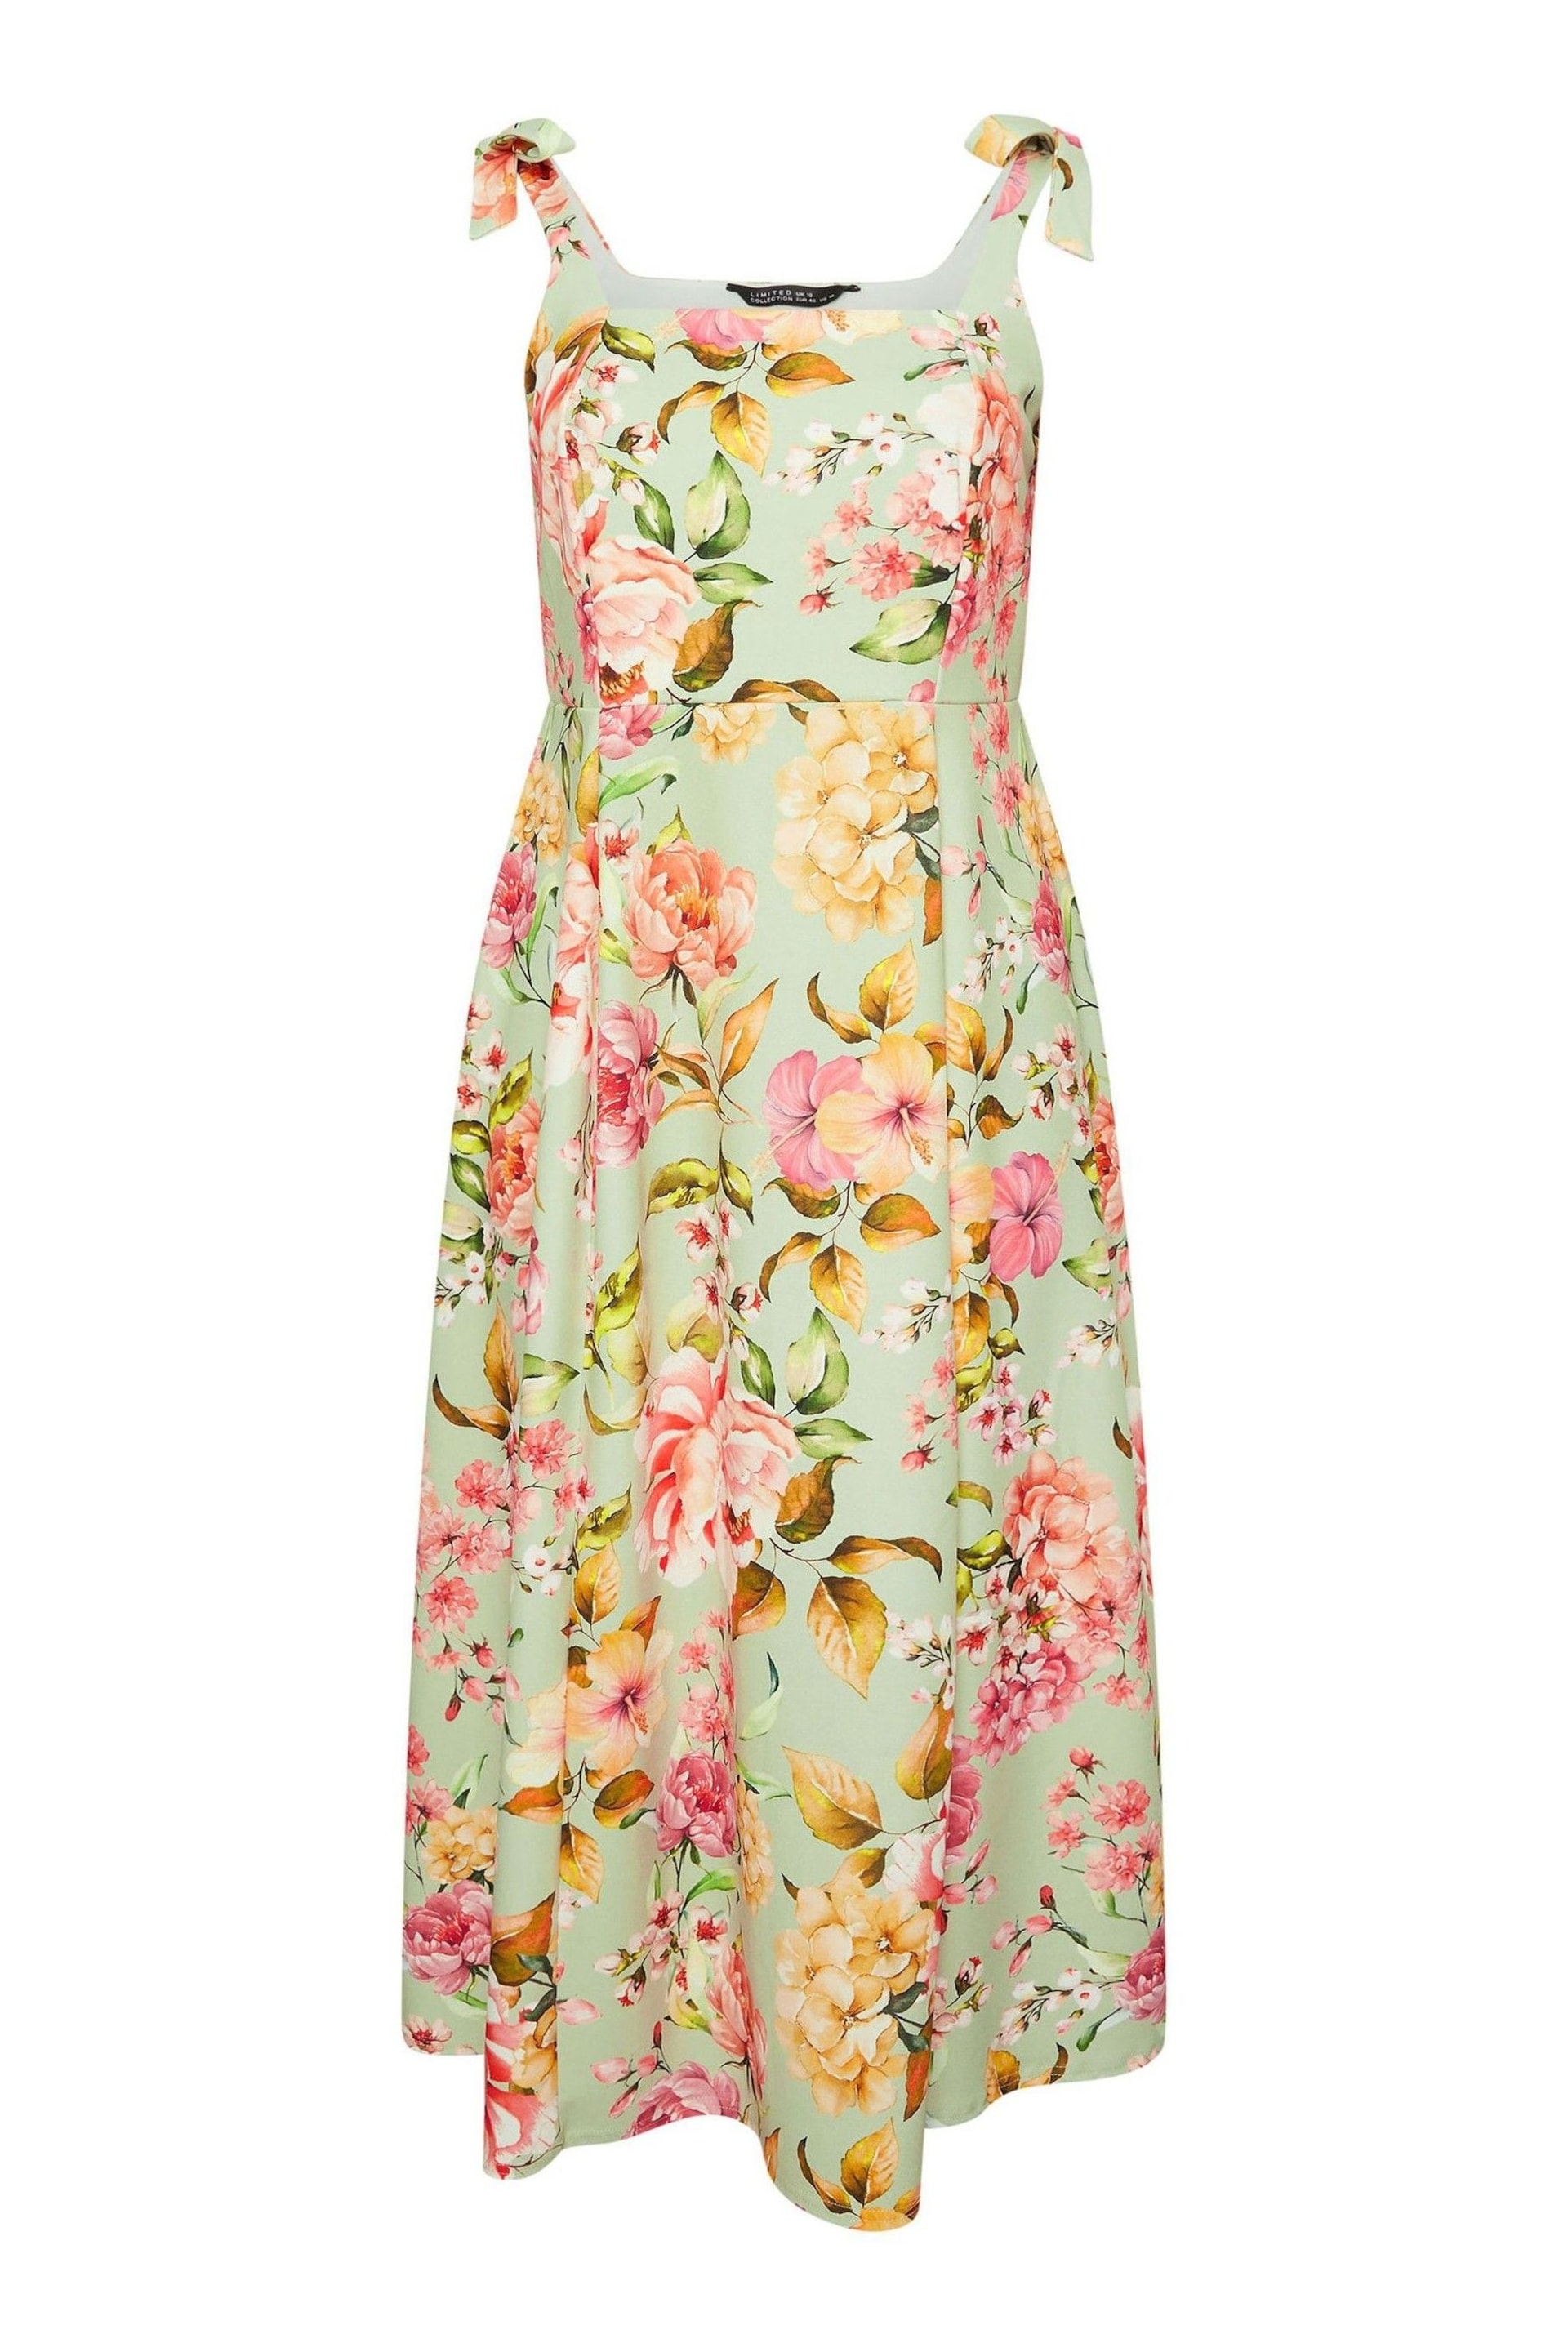 Yours Curve Green LIMITED COLLECTION Curve Blue Floral Print Bow Strap Midaxi Dress - Image 5 of 5